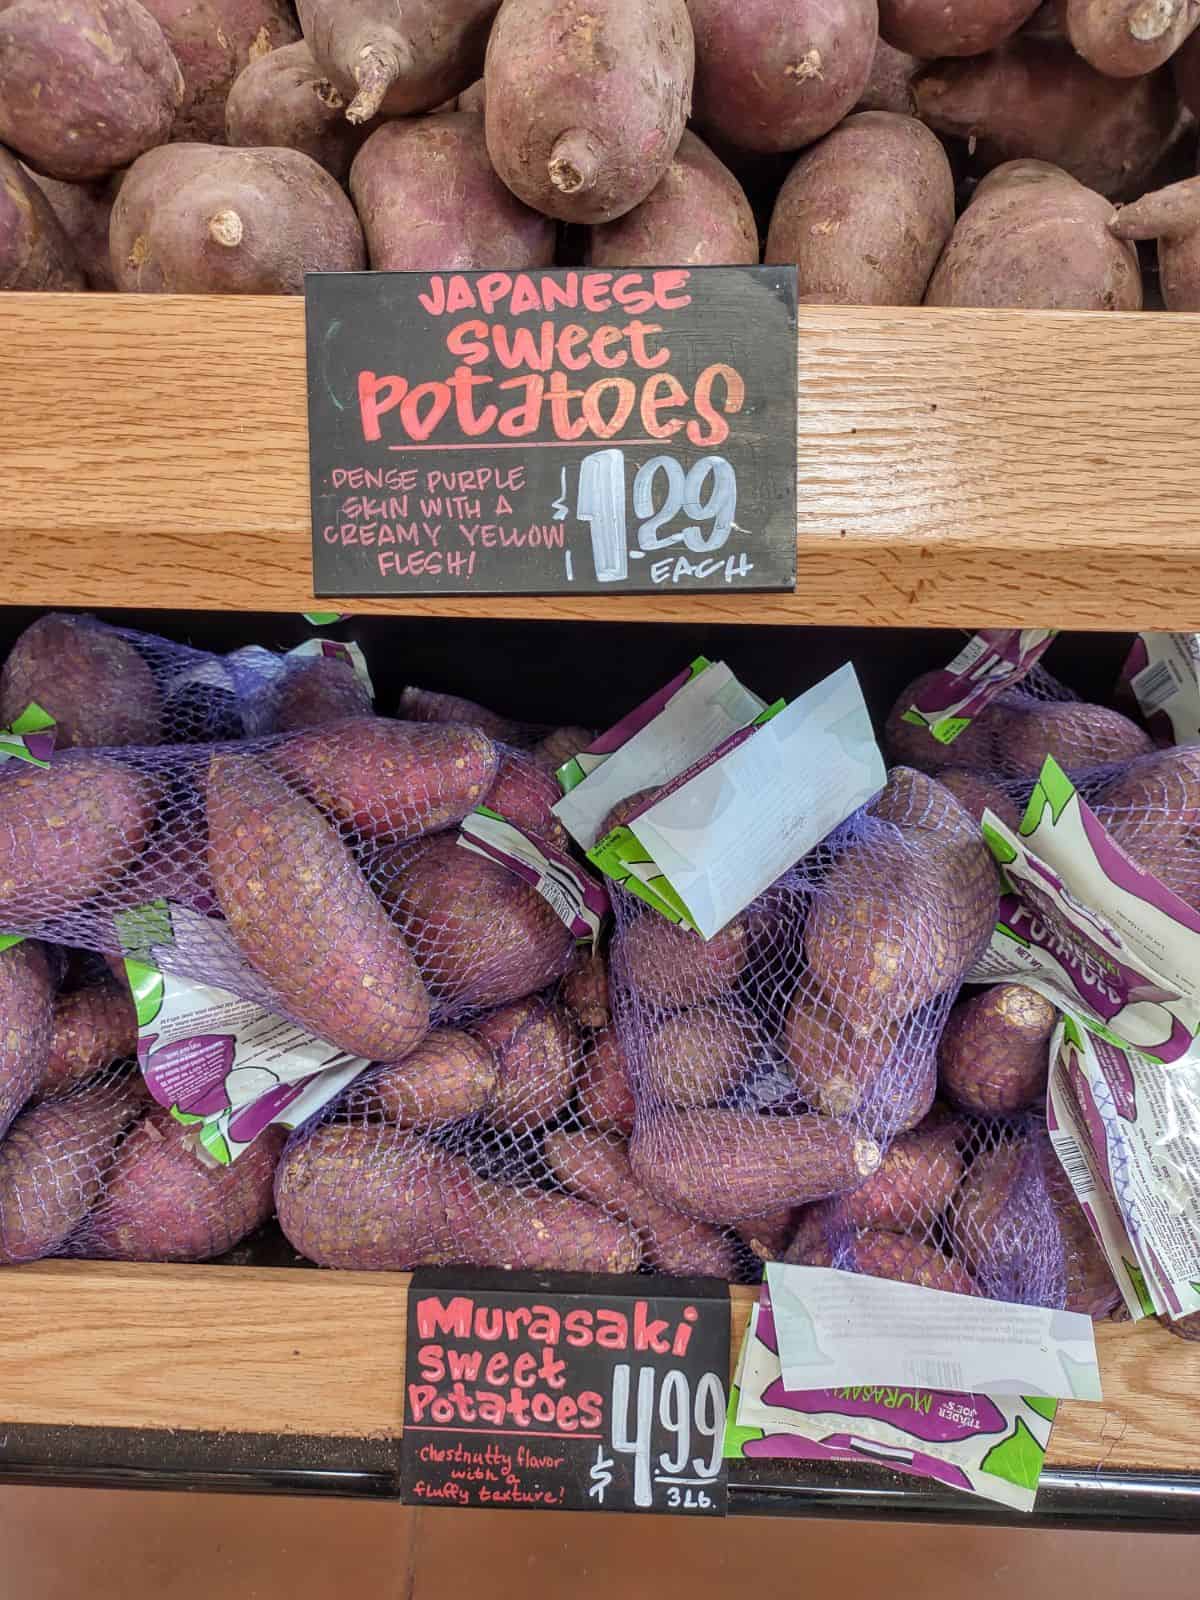 A Trader Joe's display with Japanese sweet potateos on top and Murasaki sweet potatoes in bags on the bottom.